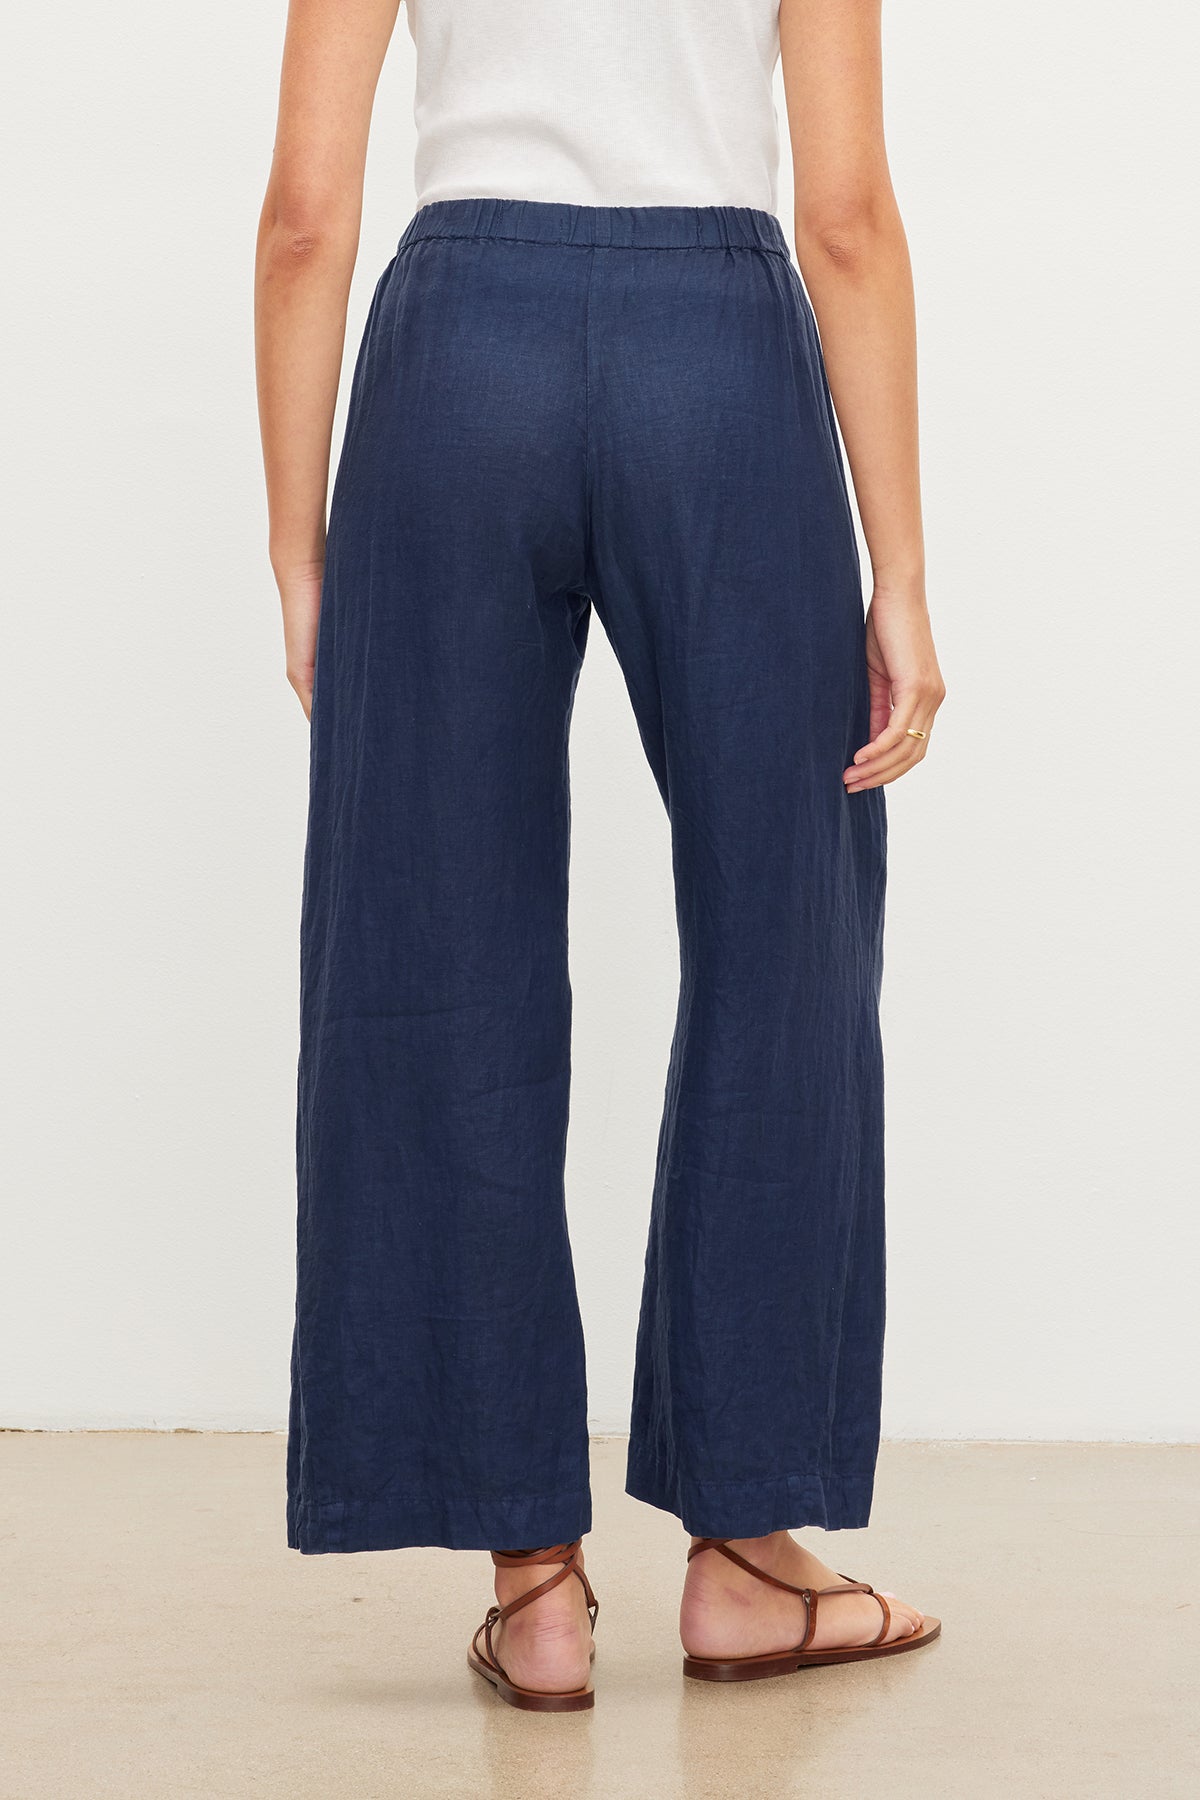 The back view of a woman wearing Velvet by Graham & Spencer's LOLA LINEN PANT.-36161318650049